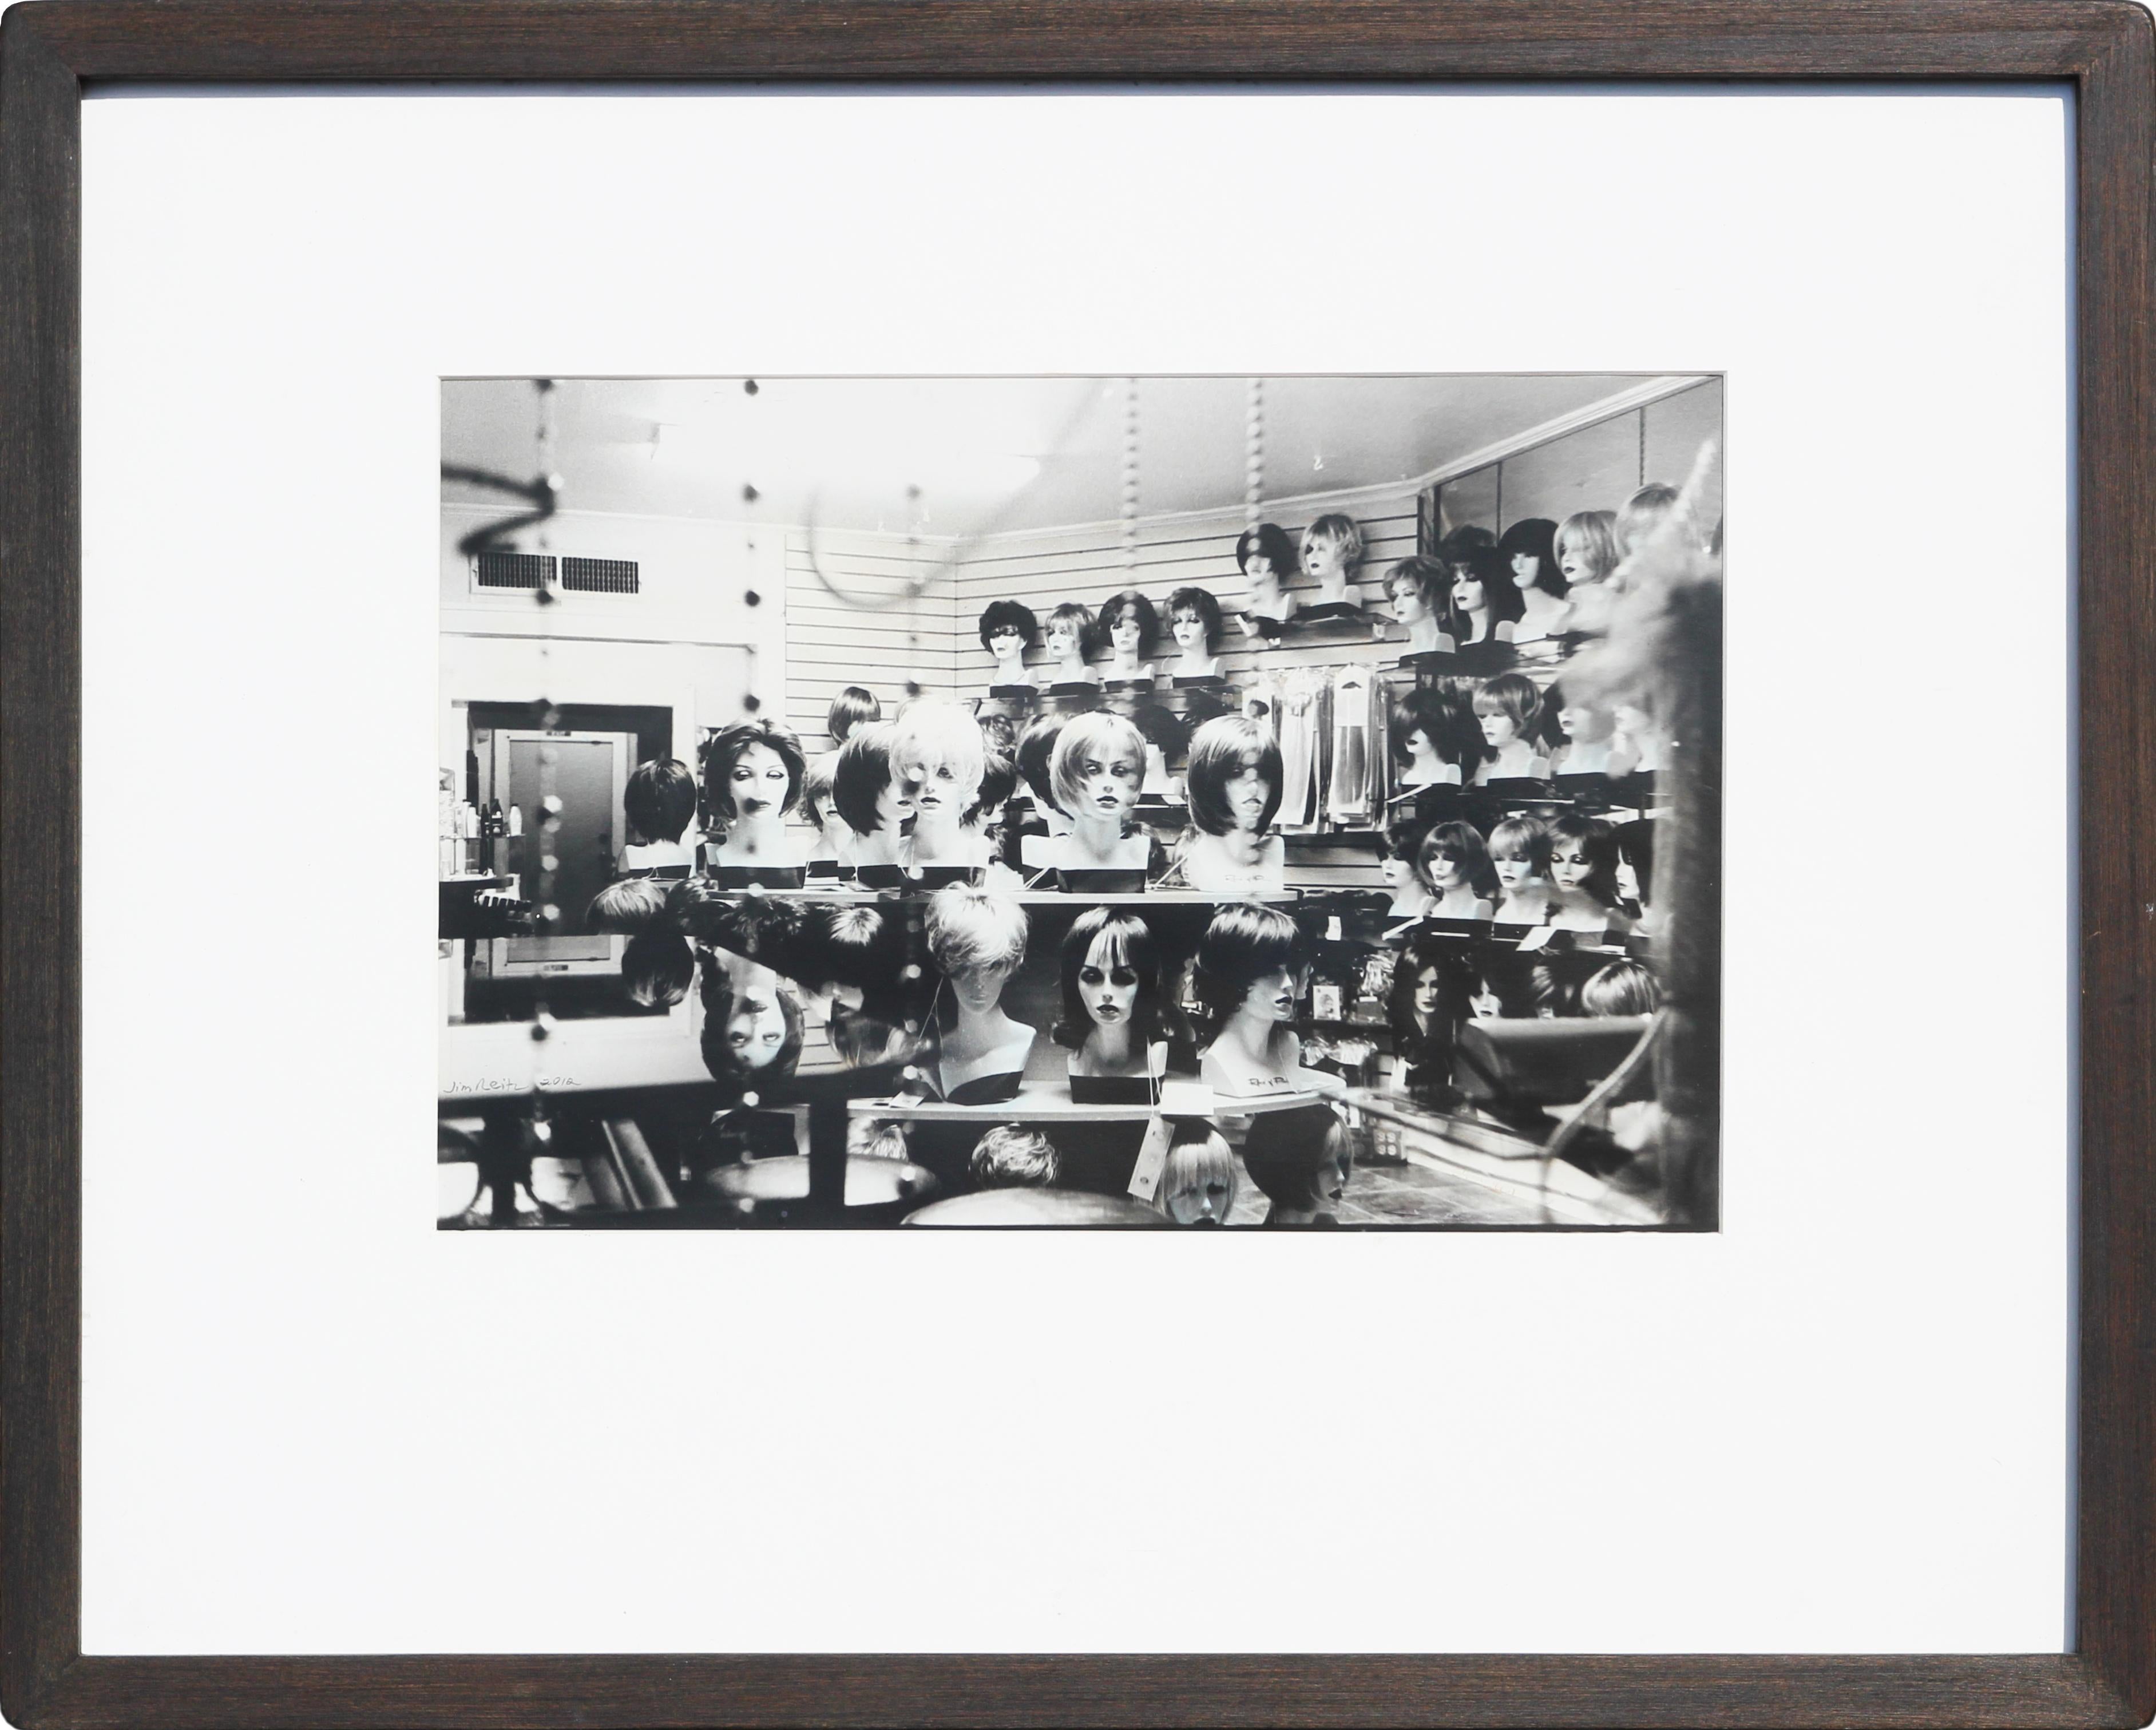 Contemporary Black and White Still Life Photograph of a Wig Shop